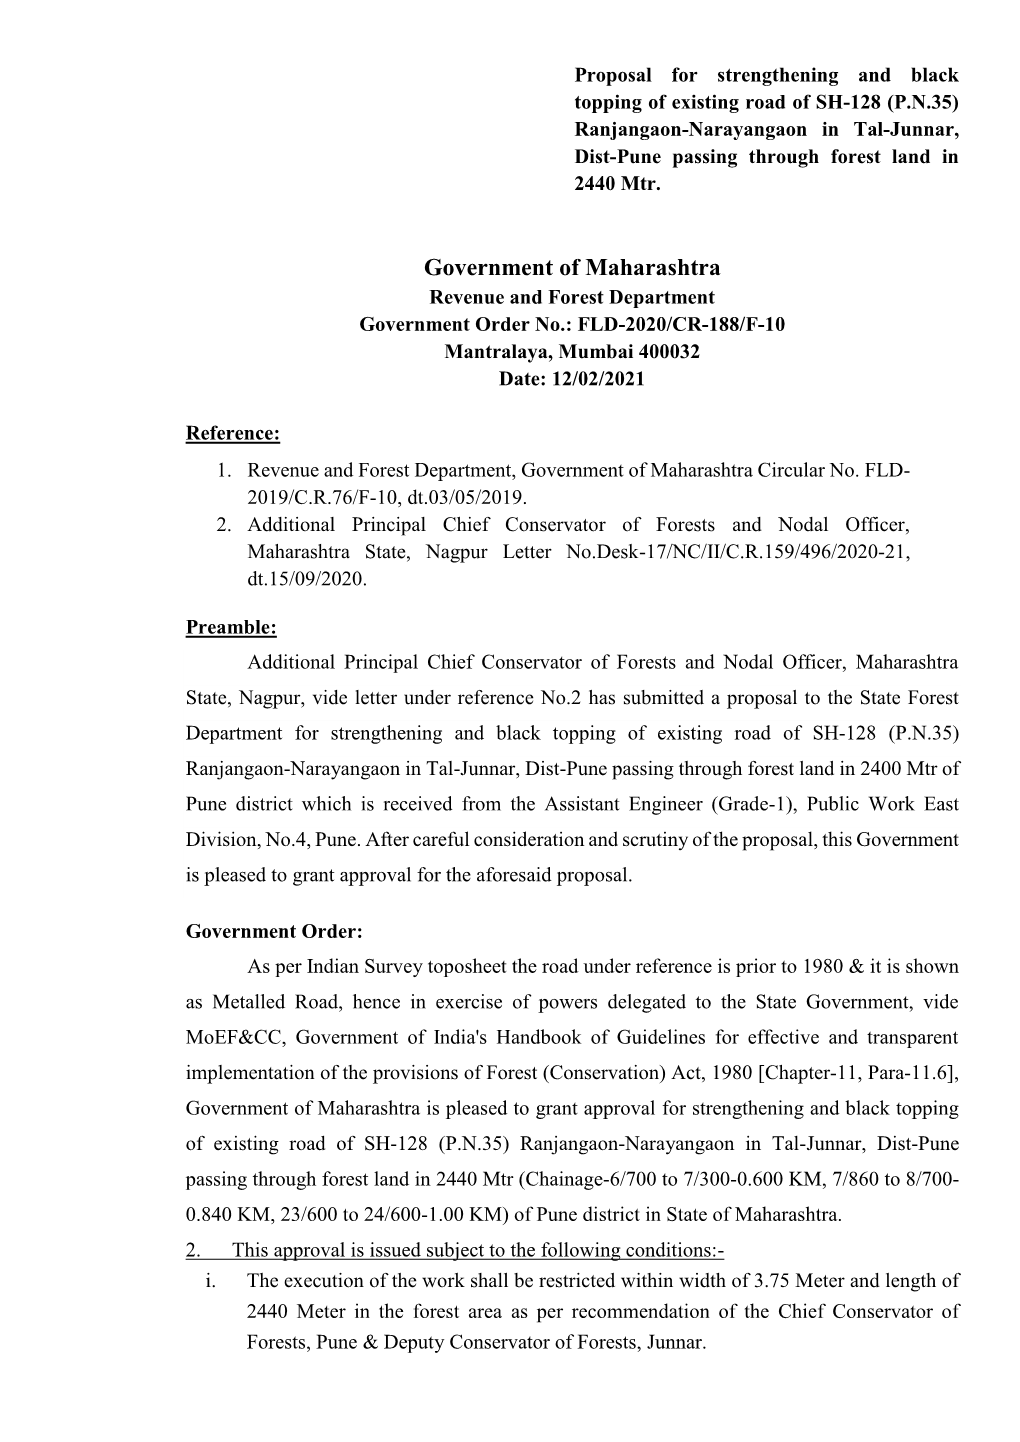 Government of Maharashtra Revenue and Forest Department Government Order No.: FLD-2020/CR-188/F-10 Mantralaya, Mumbai 400032 Date: 12/02/2021